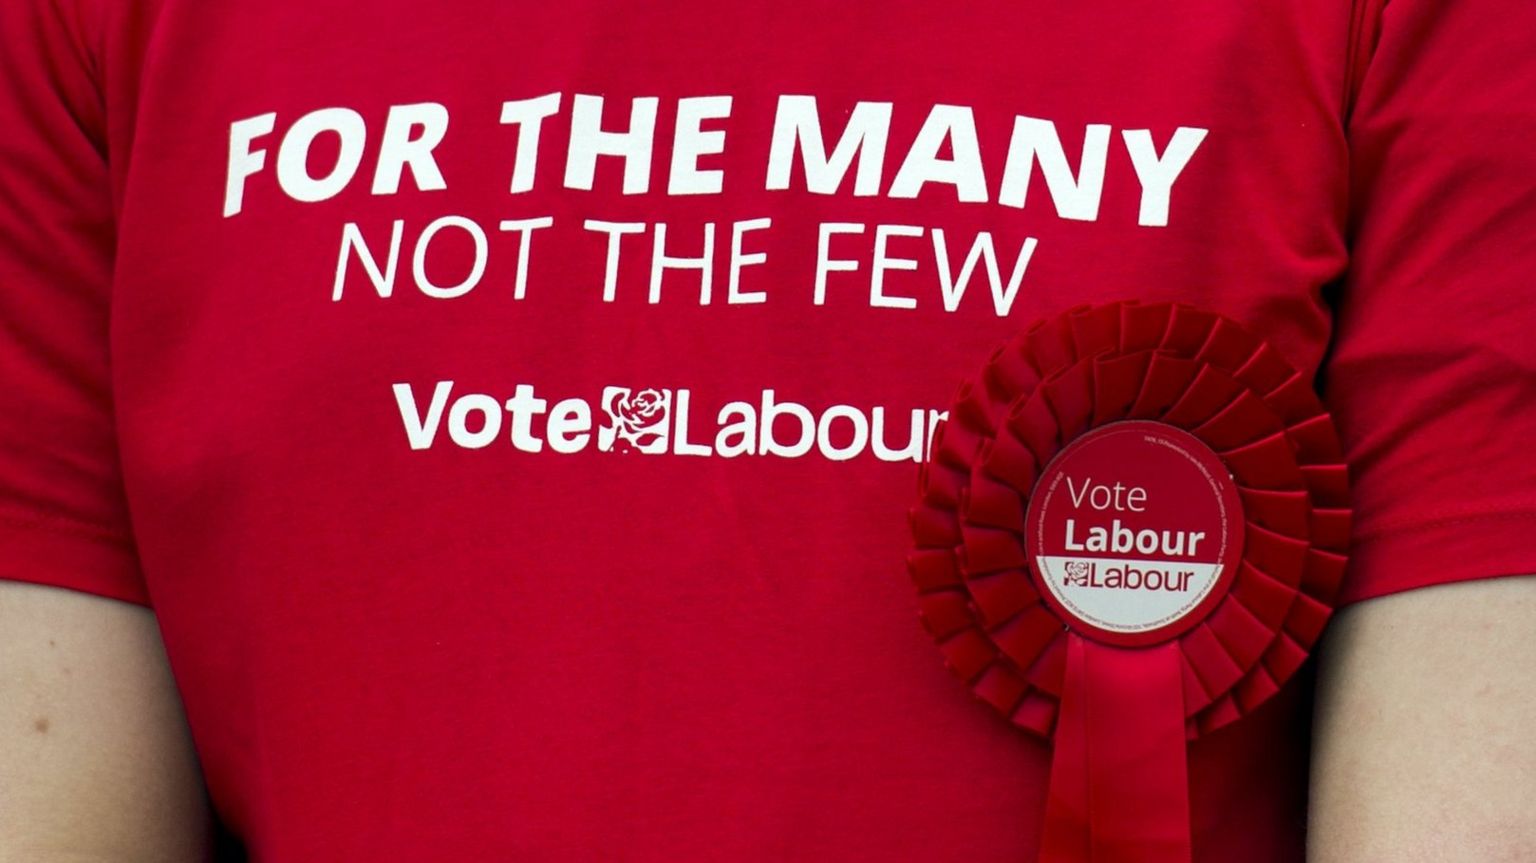 A t-shirt with the Labour logo and the phrase "For the many not the few"